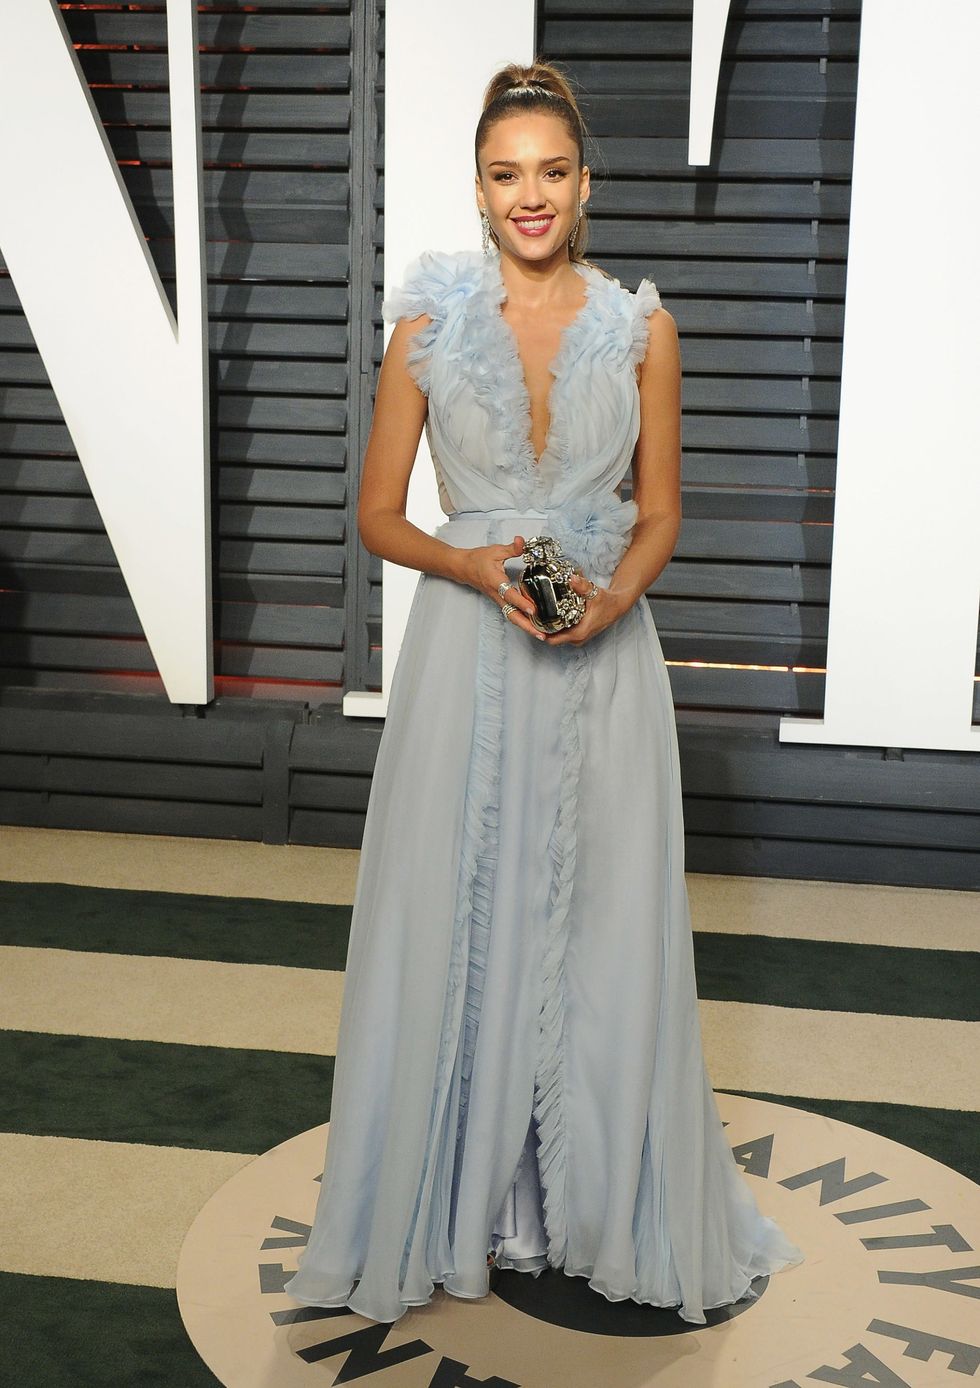 Jessica Alba Ralph & Russo gown at Vanity Fair oscar's party 2017